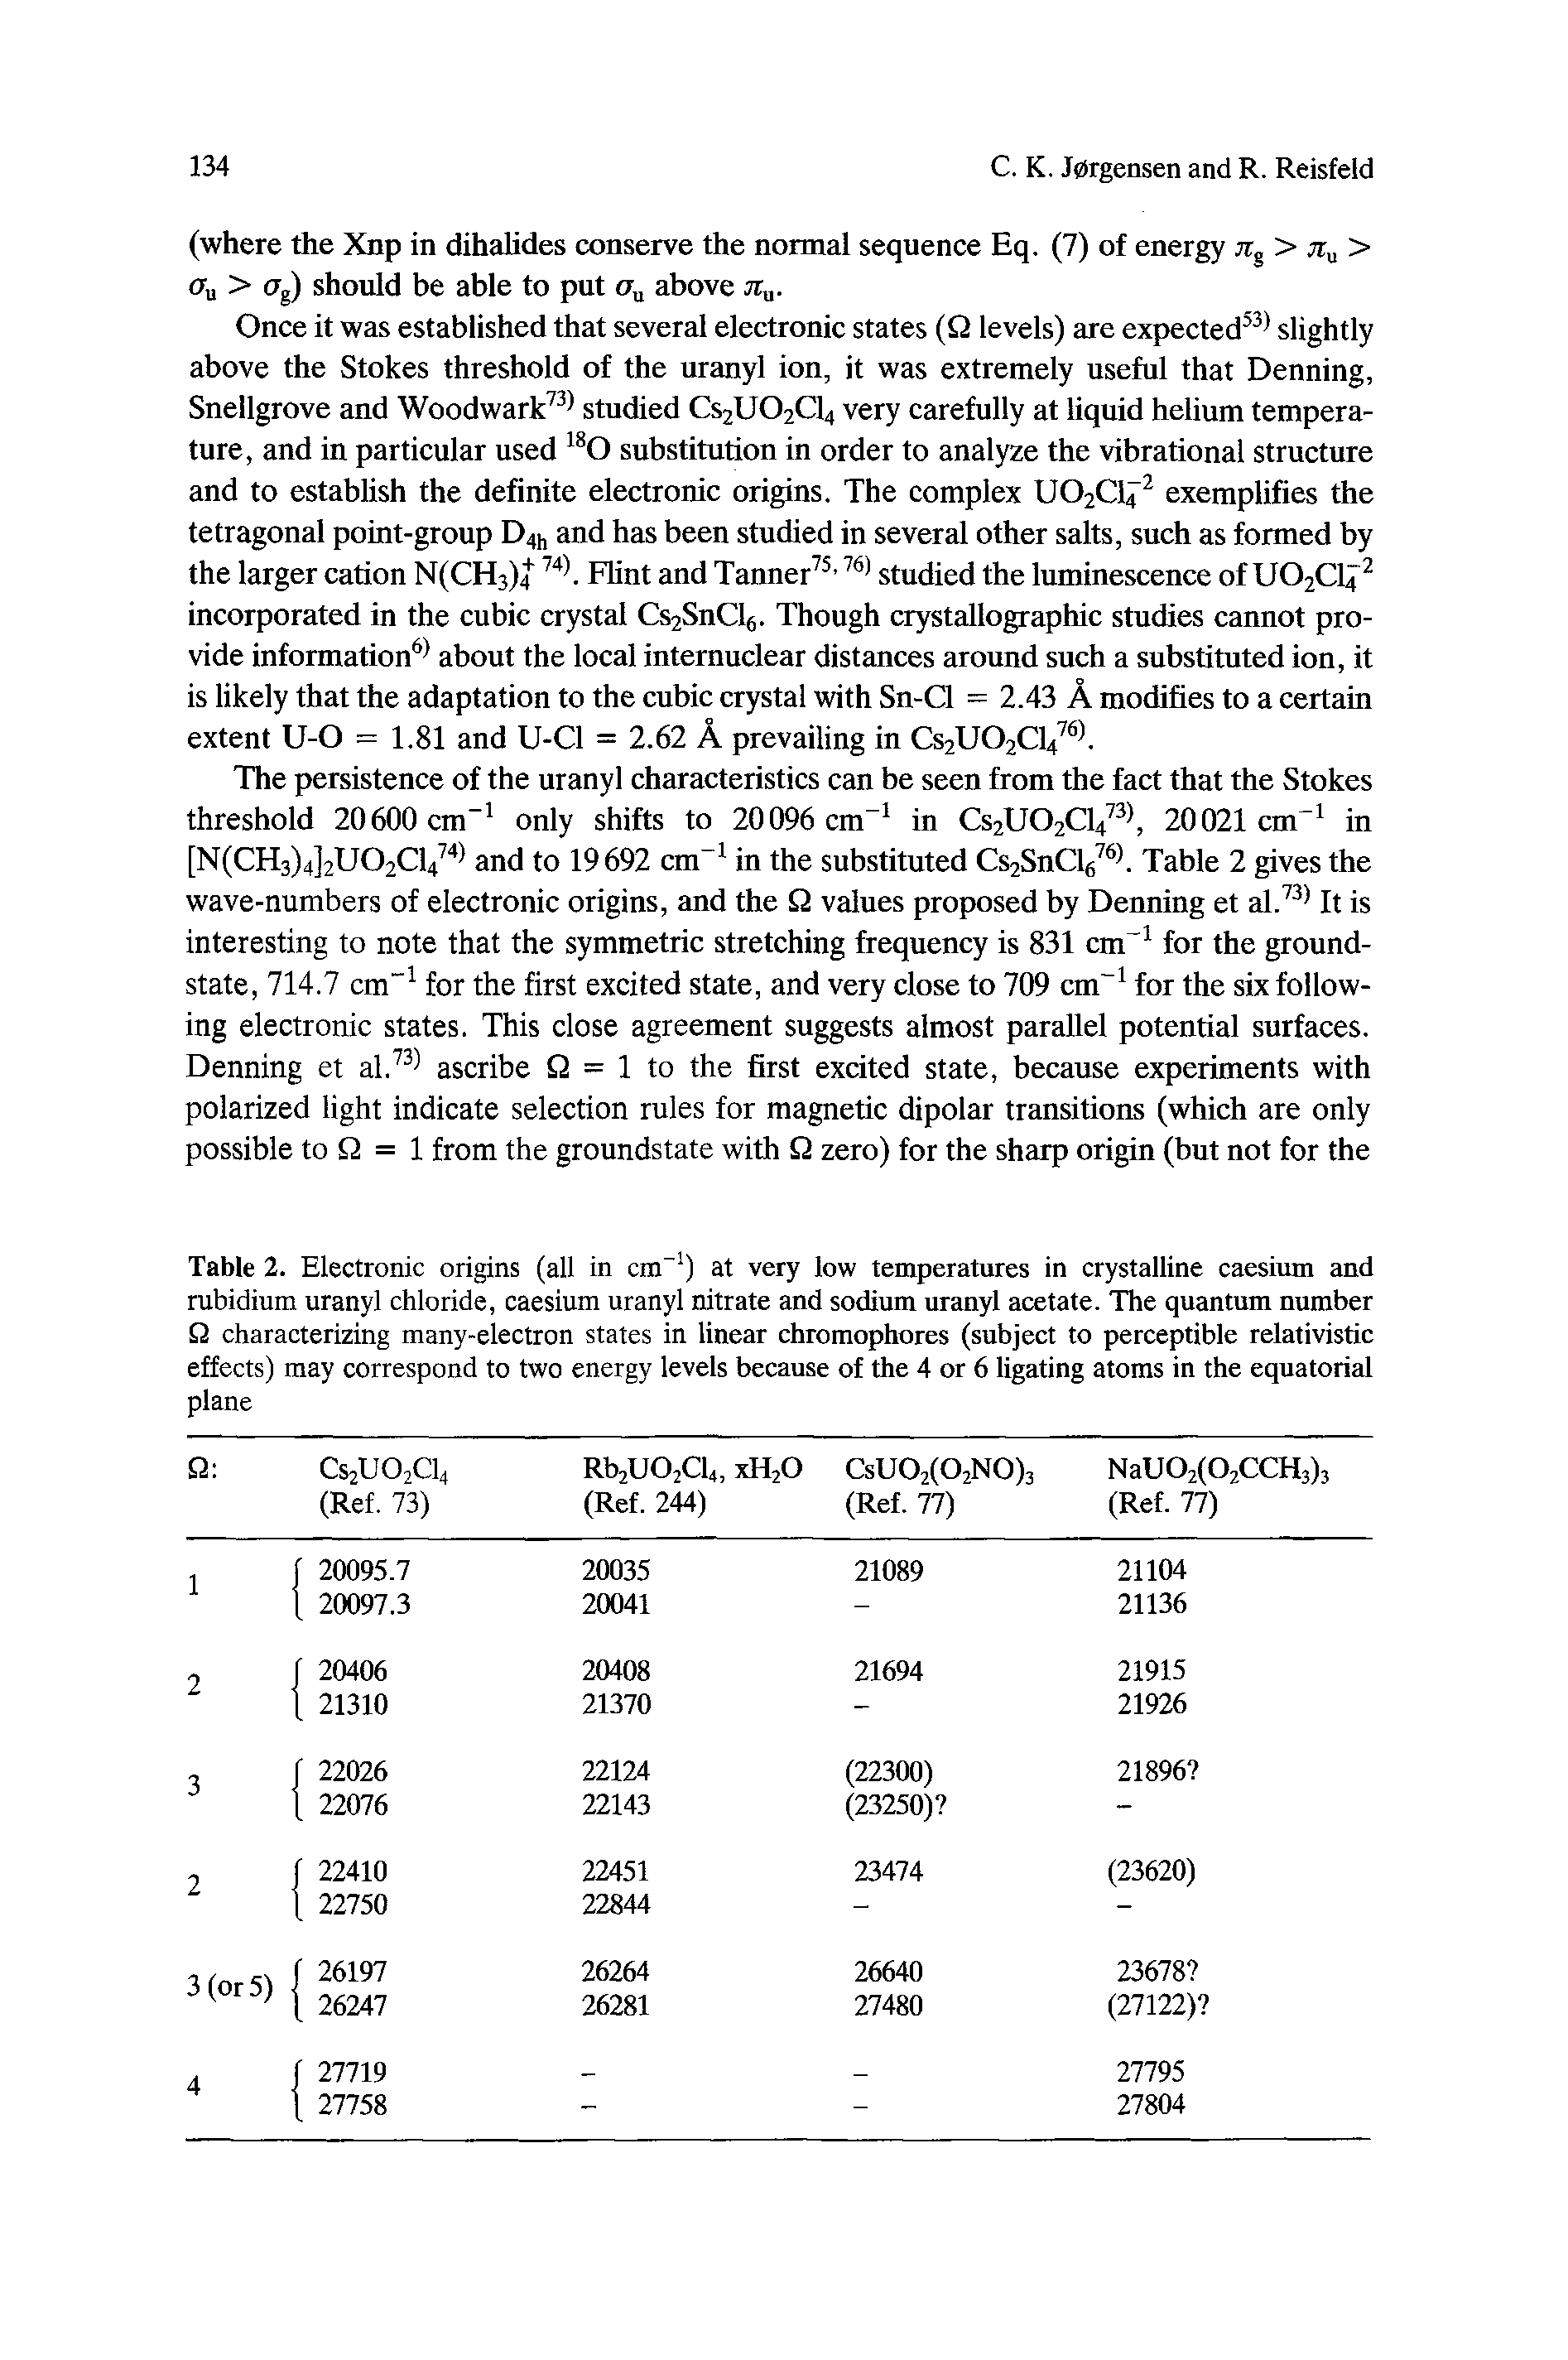 Table 2. Electronic origins (all in cm-1) at very low temperatures in crystalline caesium and rubidium uranyl chloride, caesium uranyl nitrate and sodium uranyl acetate. The quantum number Q characterizing many-electron states in linear chromophores (subject to perceptible relativistic effects) may correspond to two energy levels because of the 4 or 6 ligating atoms in the equatorial plane...